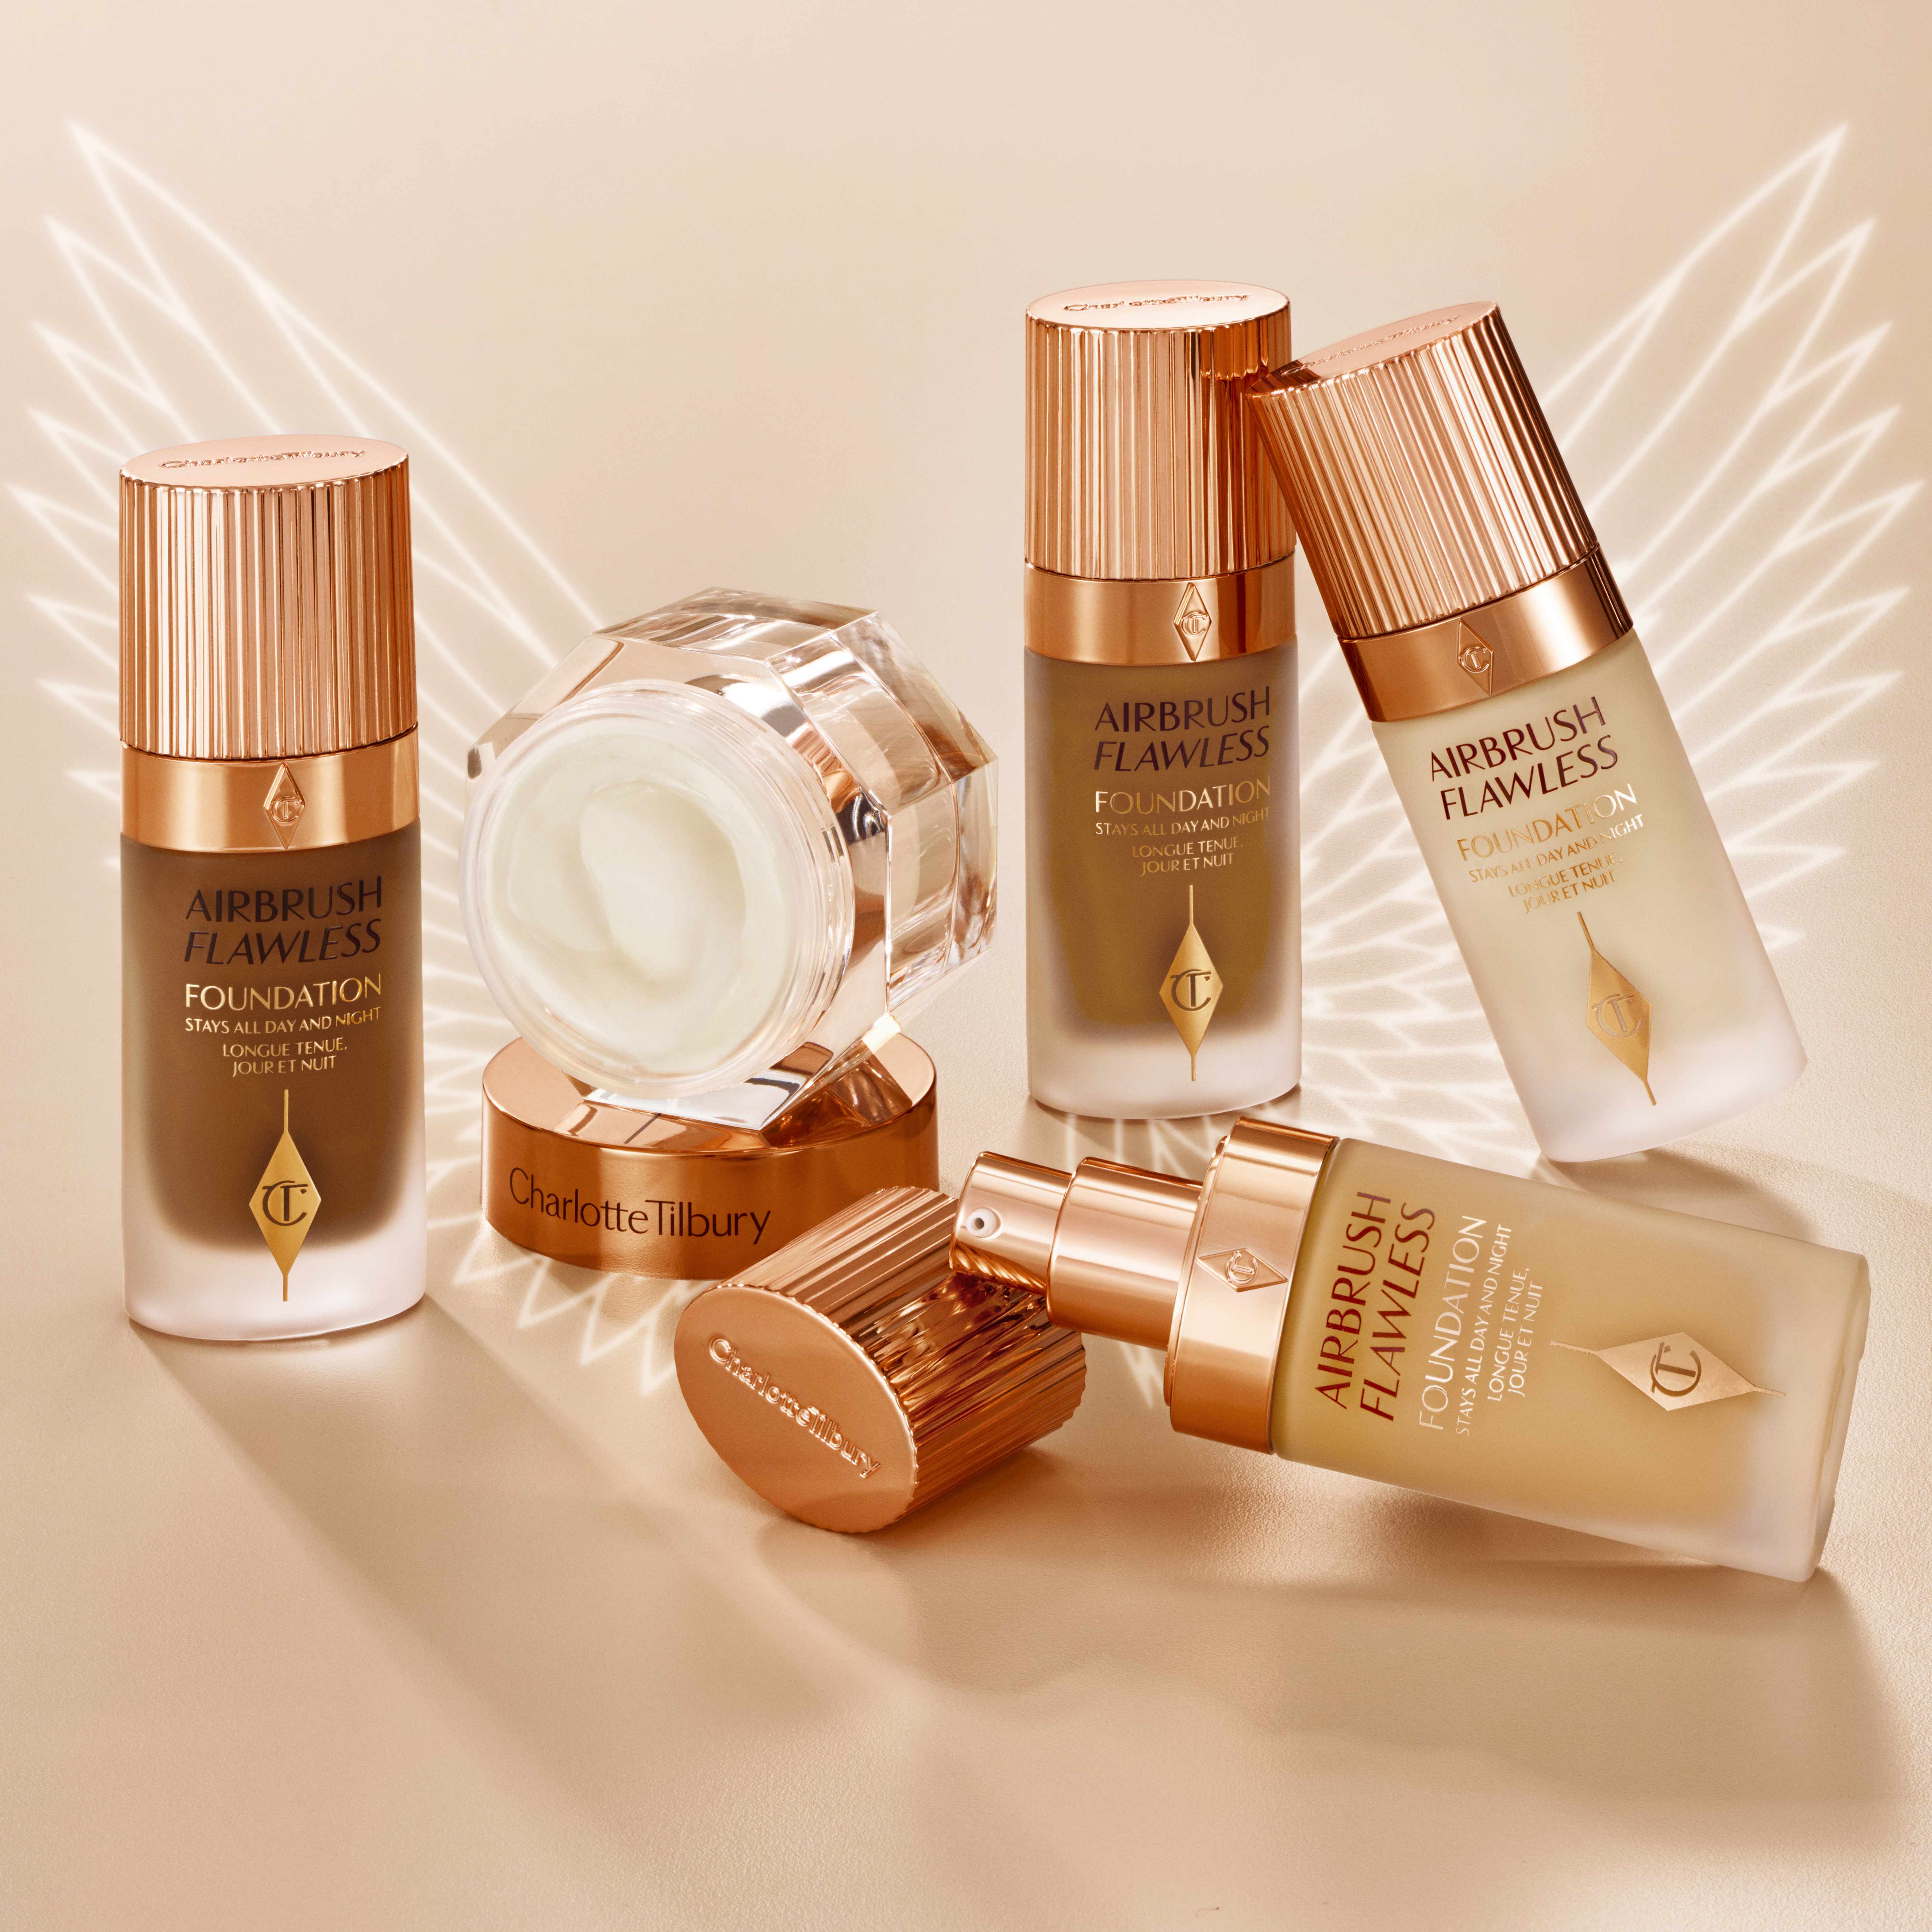 Thick, pearly-white cream in an open glass jar with its rose-gold-coloured lid next to it along with a collection of foundation in different shades, in frosted glass bottles with gold-coloured lids.